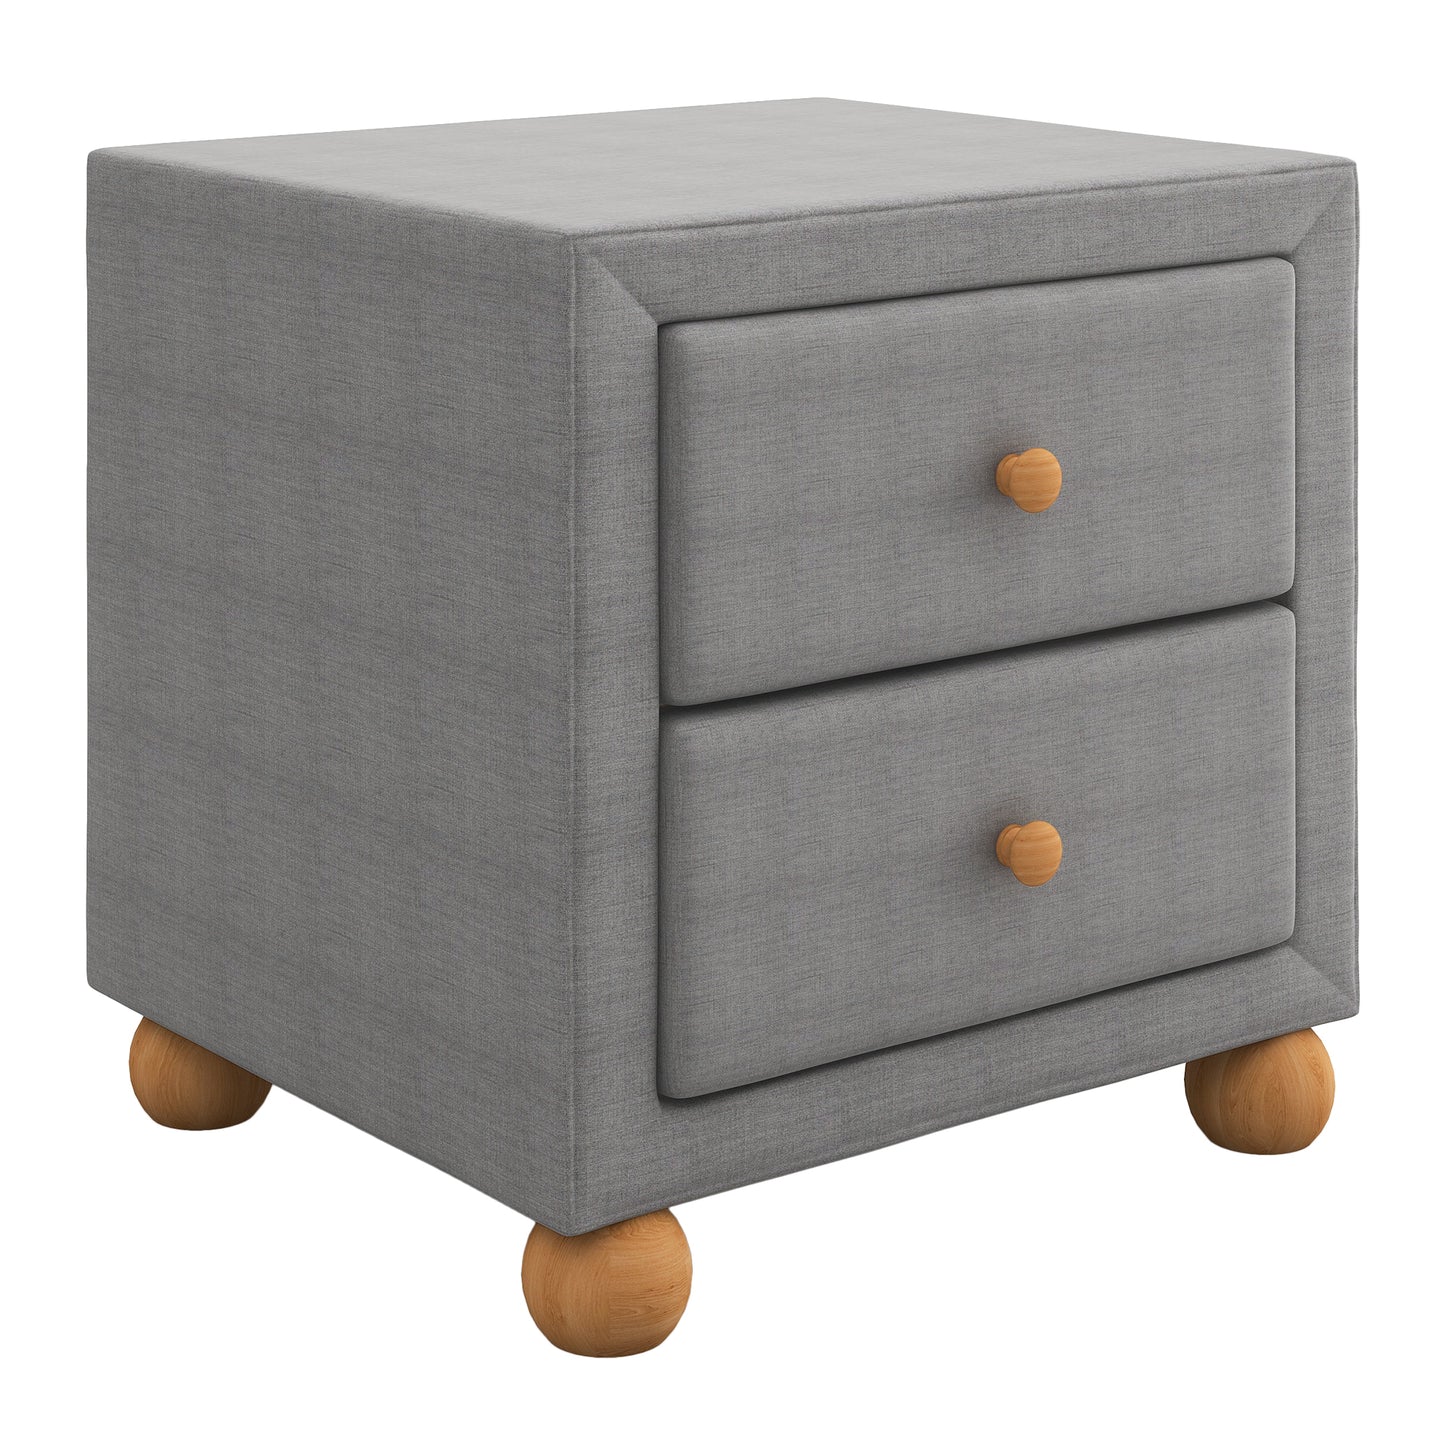 Modern Upholstered Storage Nightstand with 2 Drawers,Natural Wood Knobs,Dark Gray